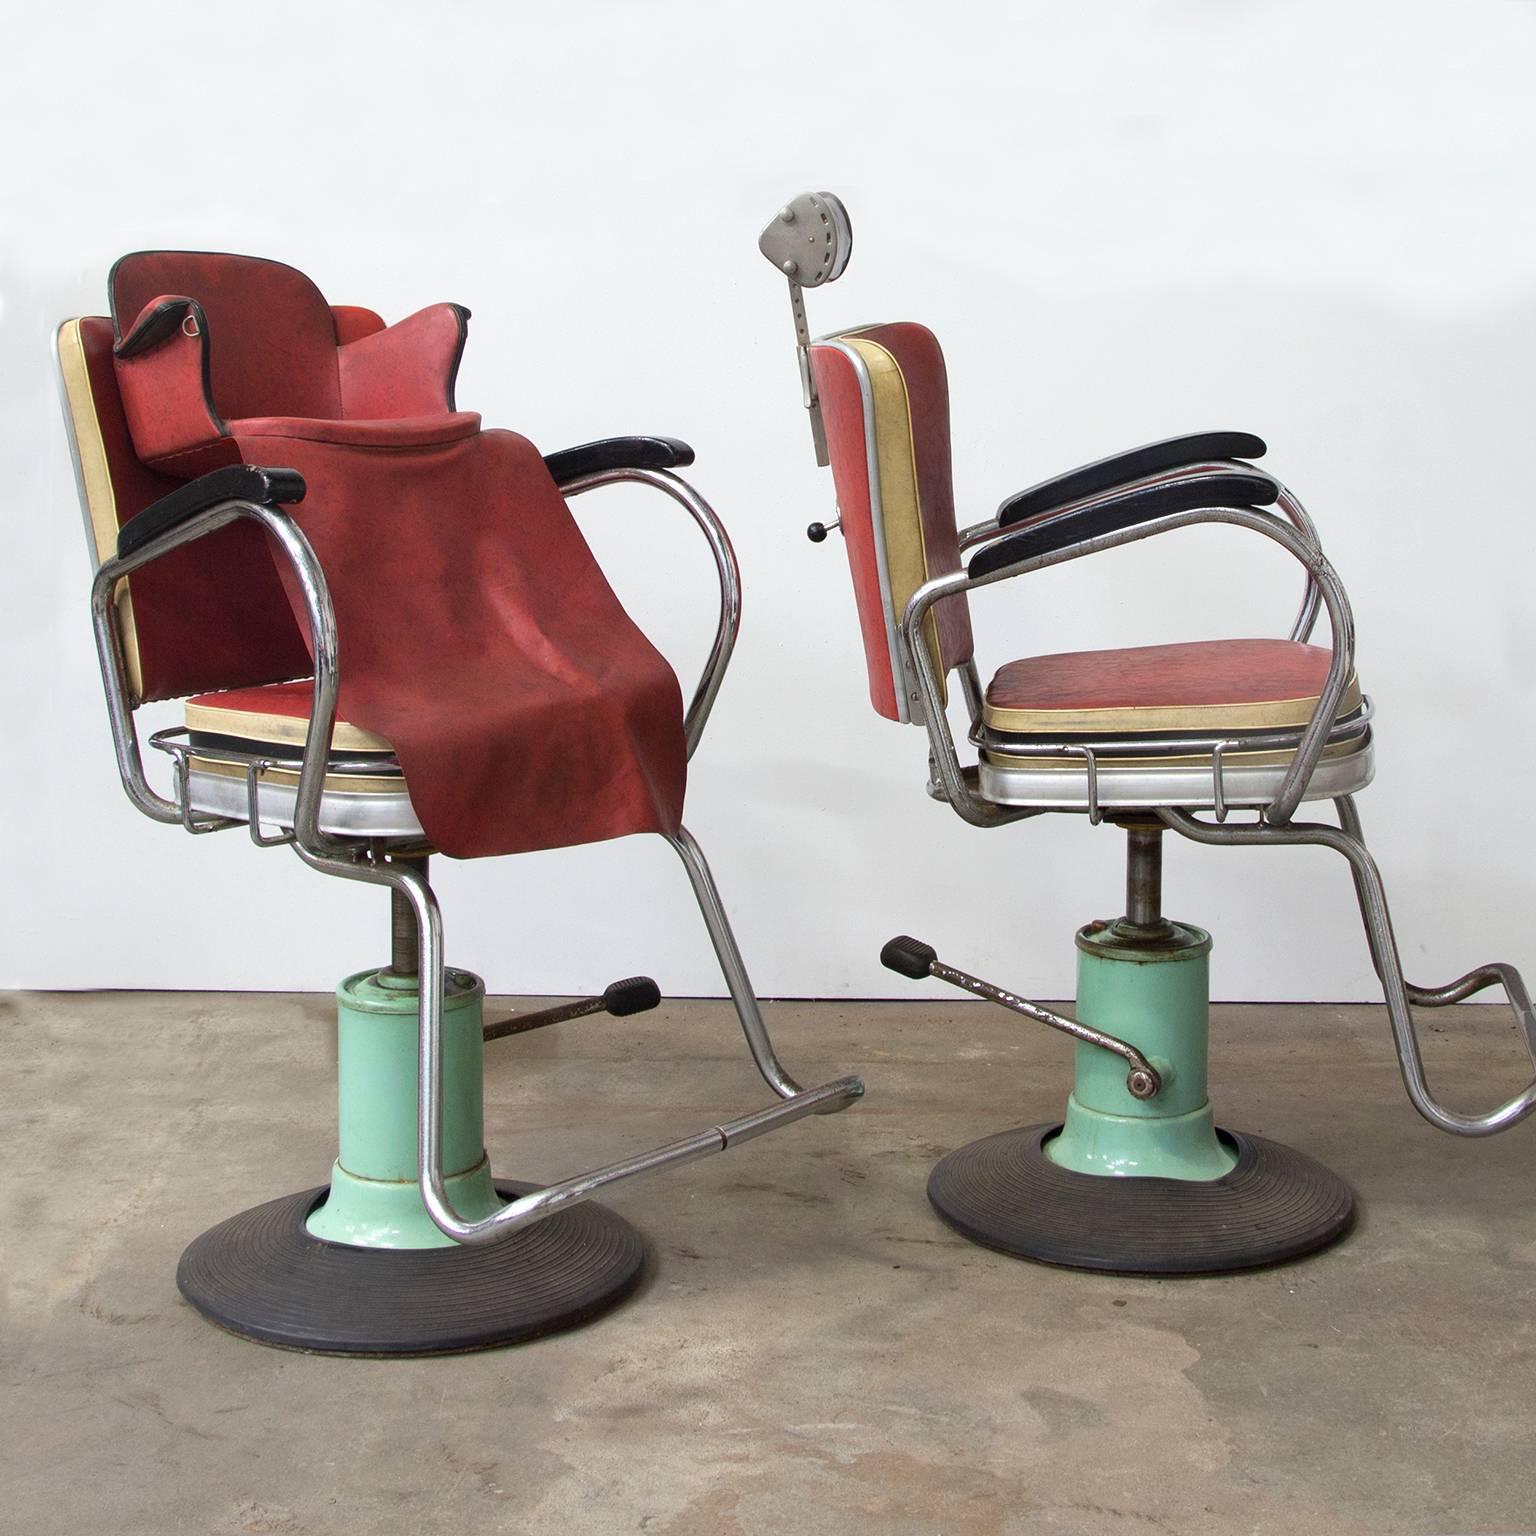 Authentic, very rare original 1950s barber set, still in original upholstery and paint. This set of original Barberchairs by Nubert, Schwäb Gmünd with a separate child seat. The childseat can be placed on the chair as shown on picture #6. Measure: